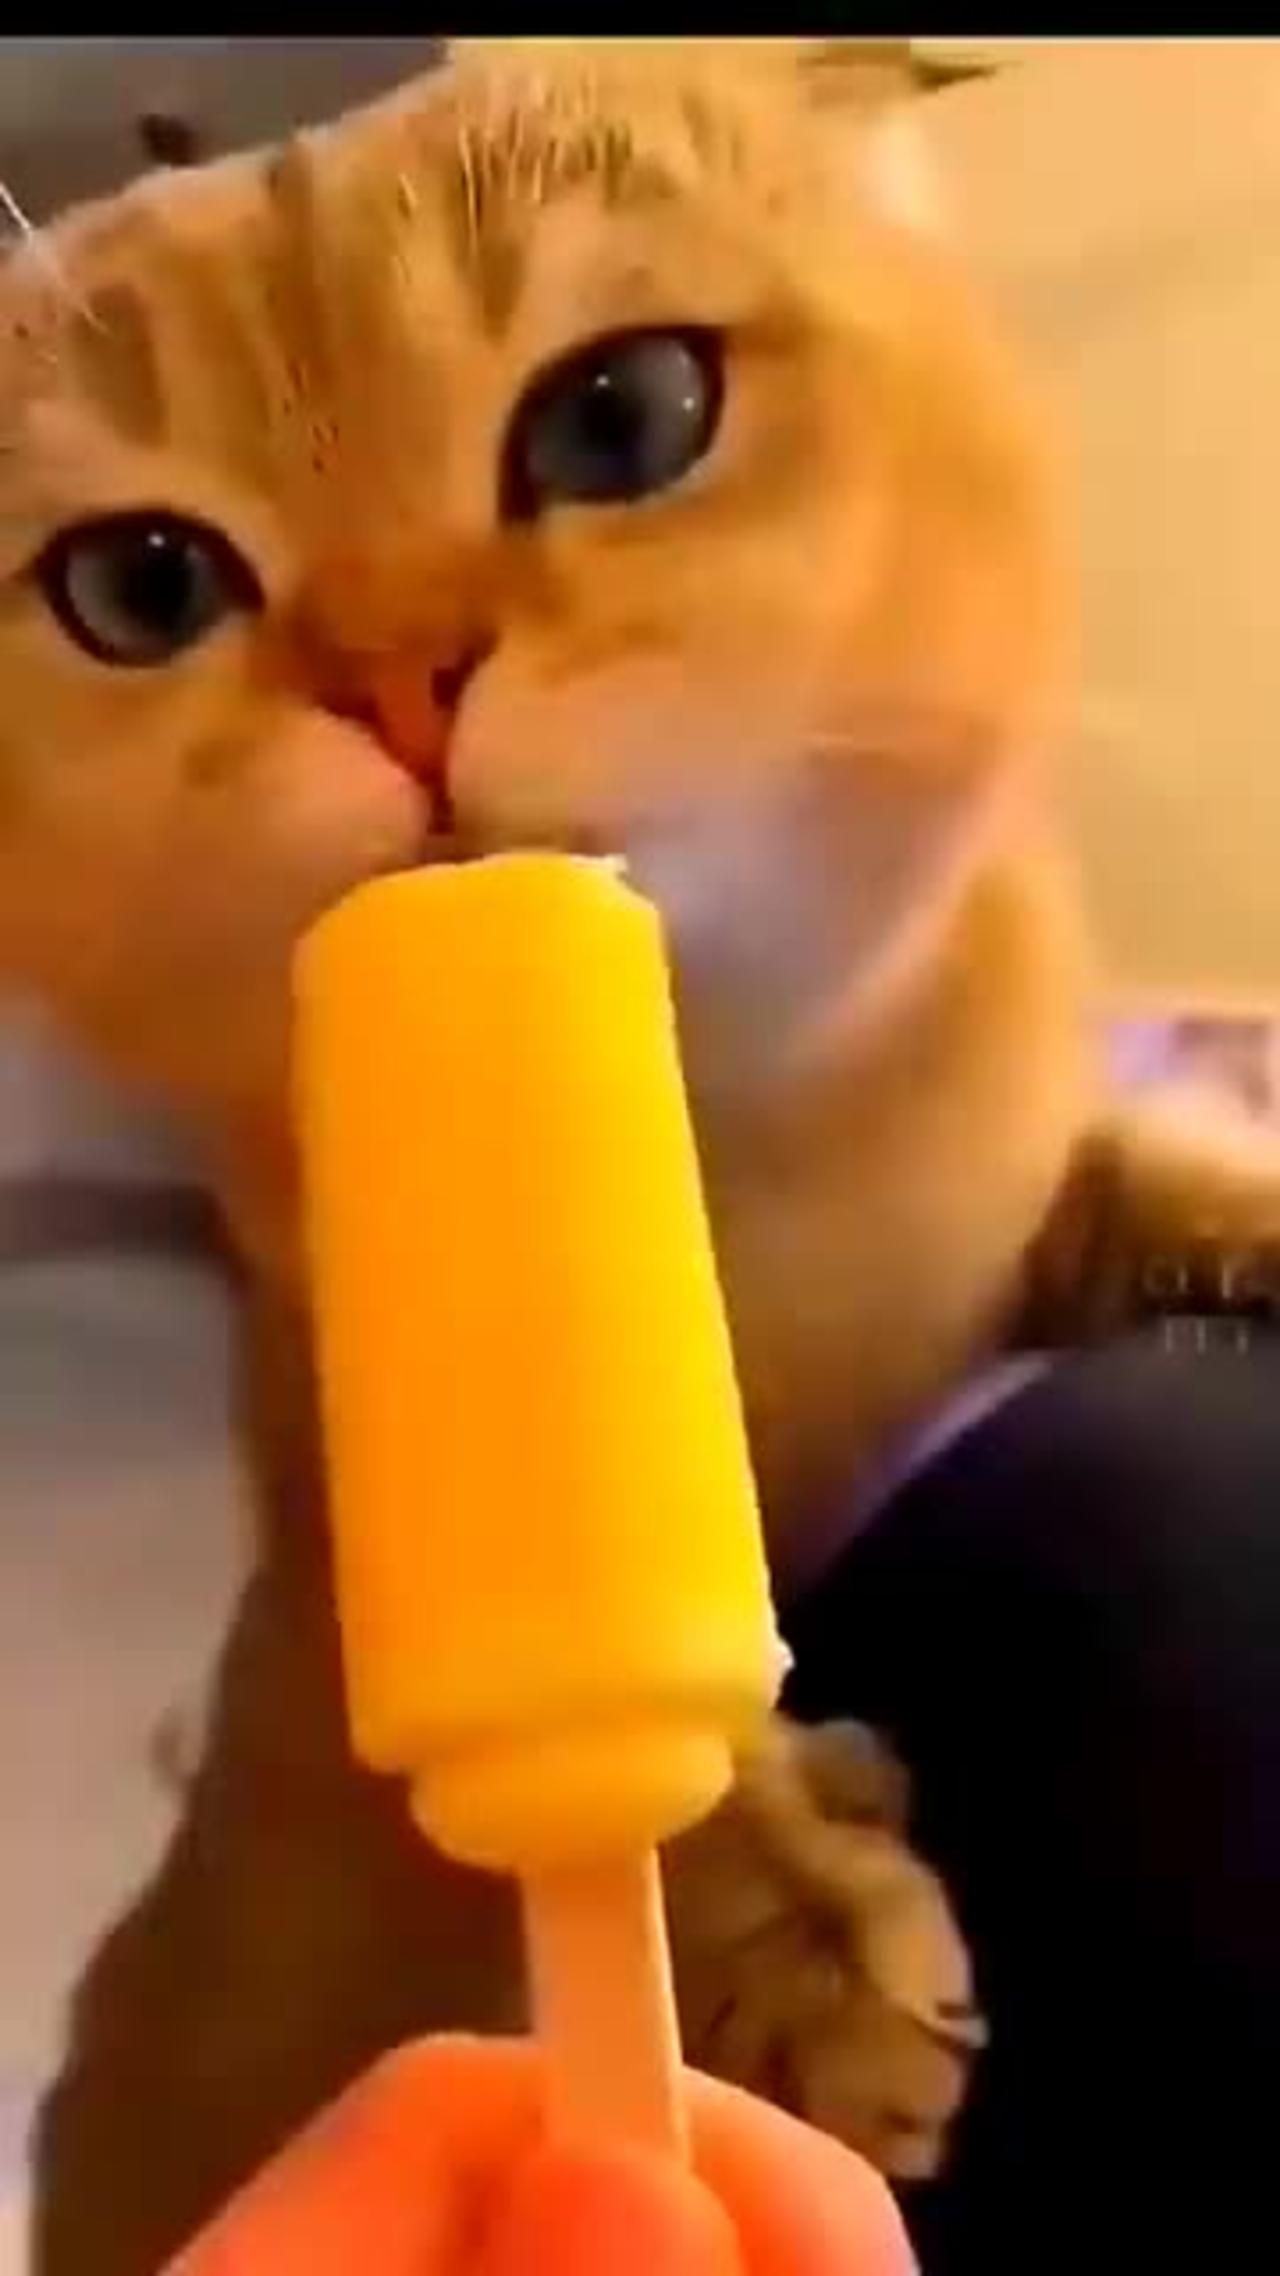 Cute and funny animal video 😹 must watch 👀👀